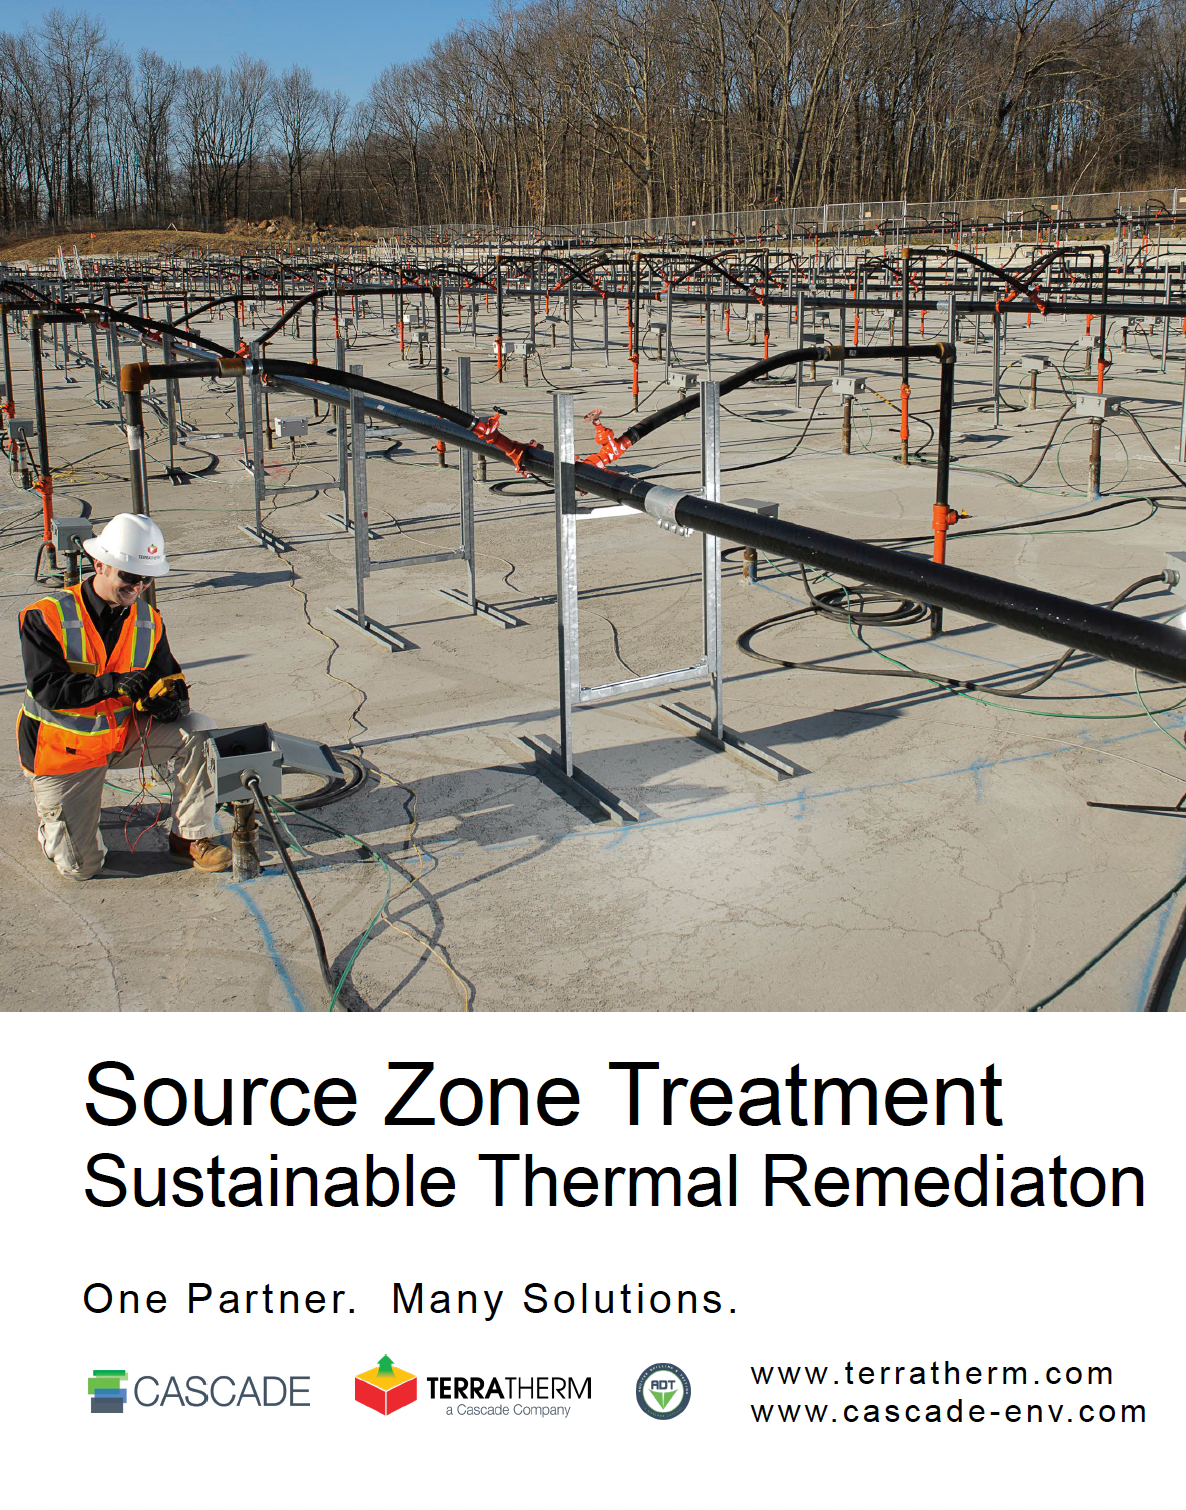 Source Zone Treatment - Sustainable Thermal Remediation